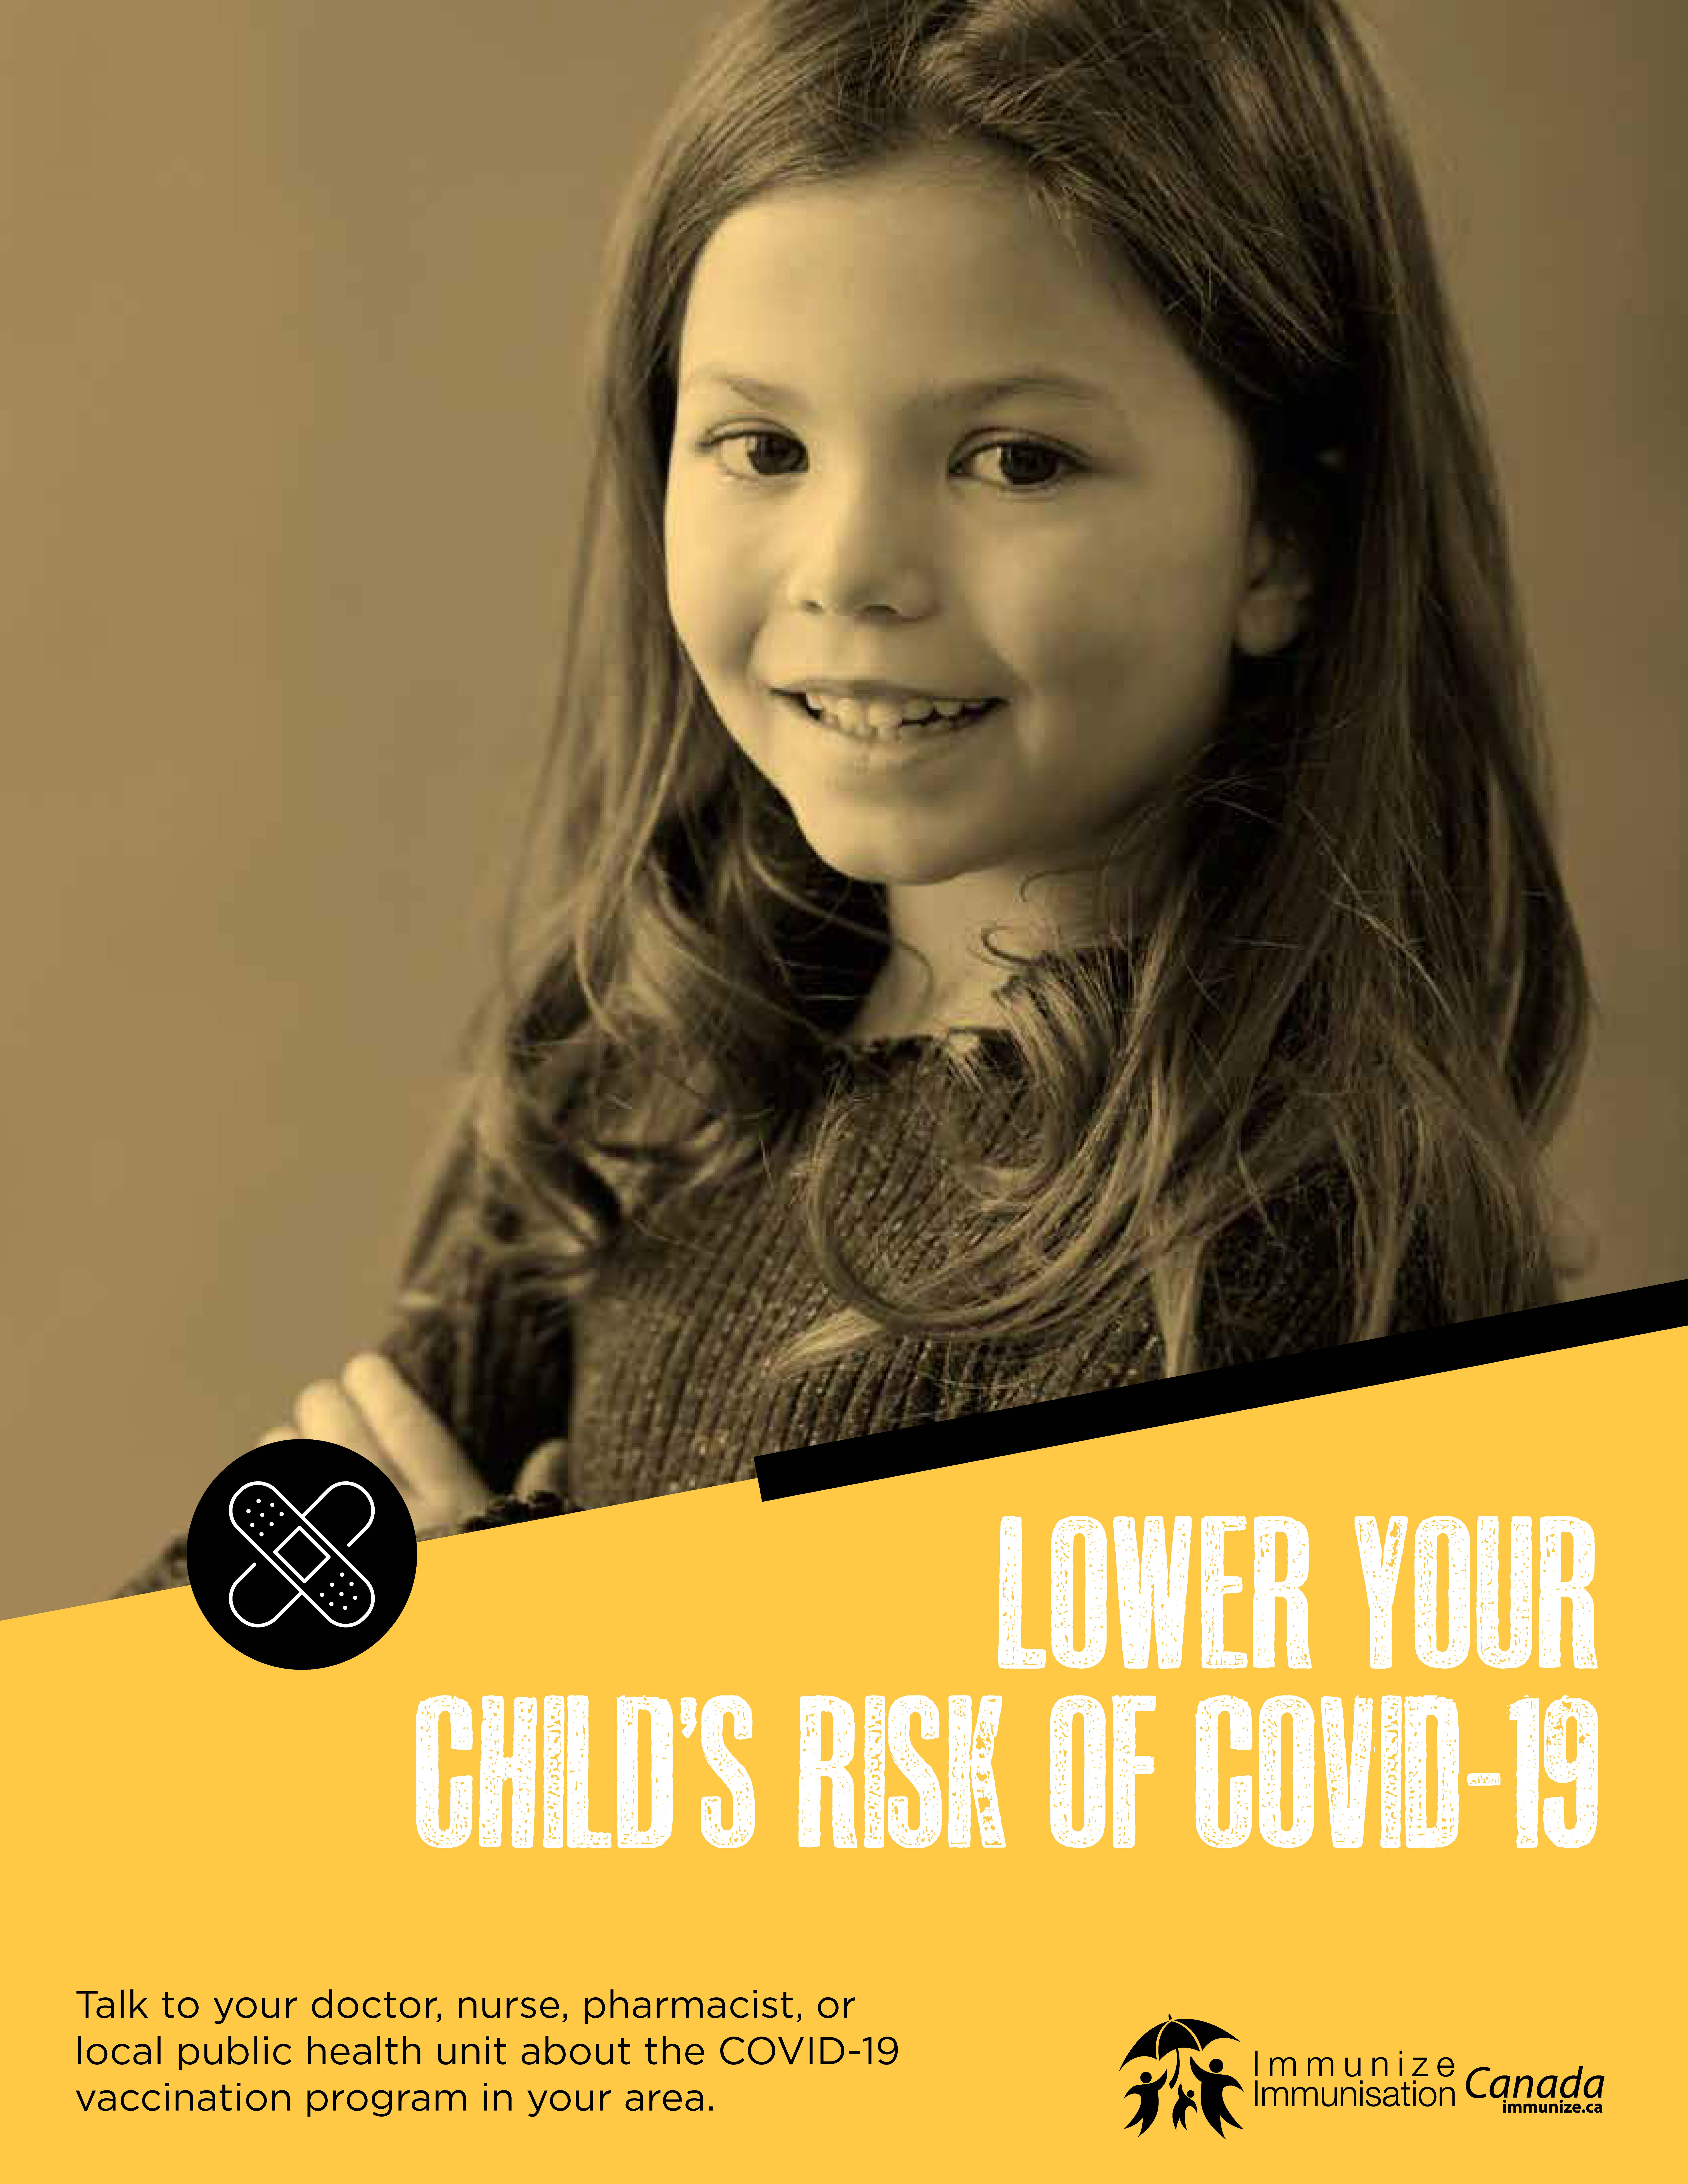 Lower your child's risk of COVID-19.